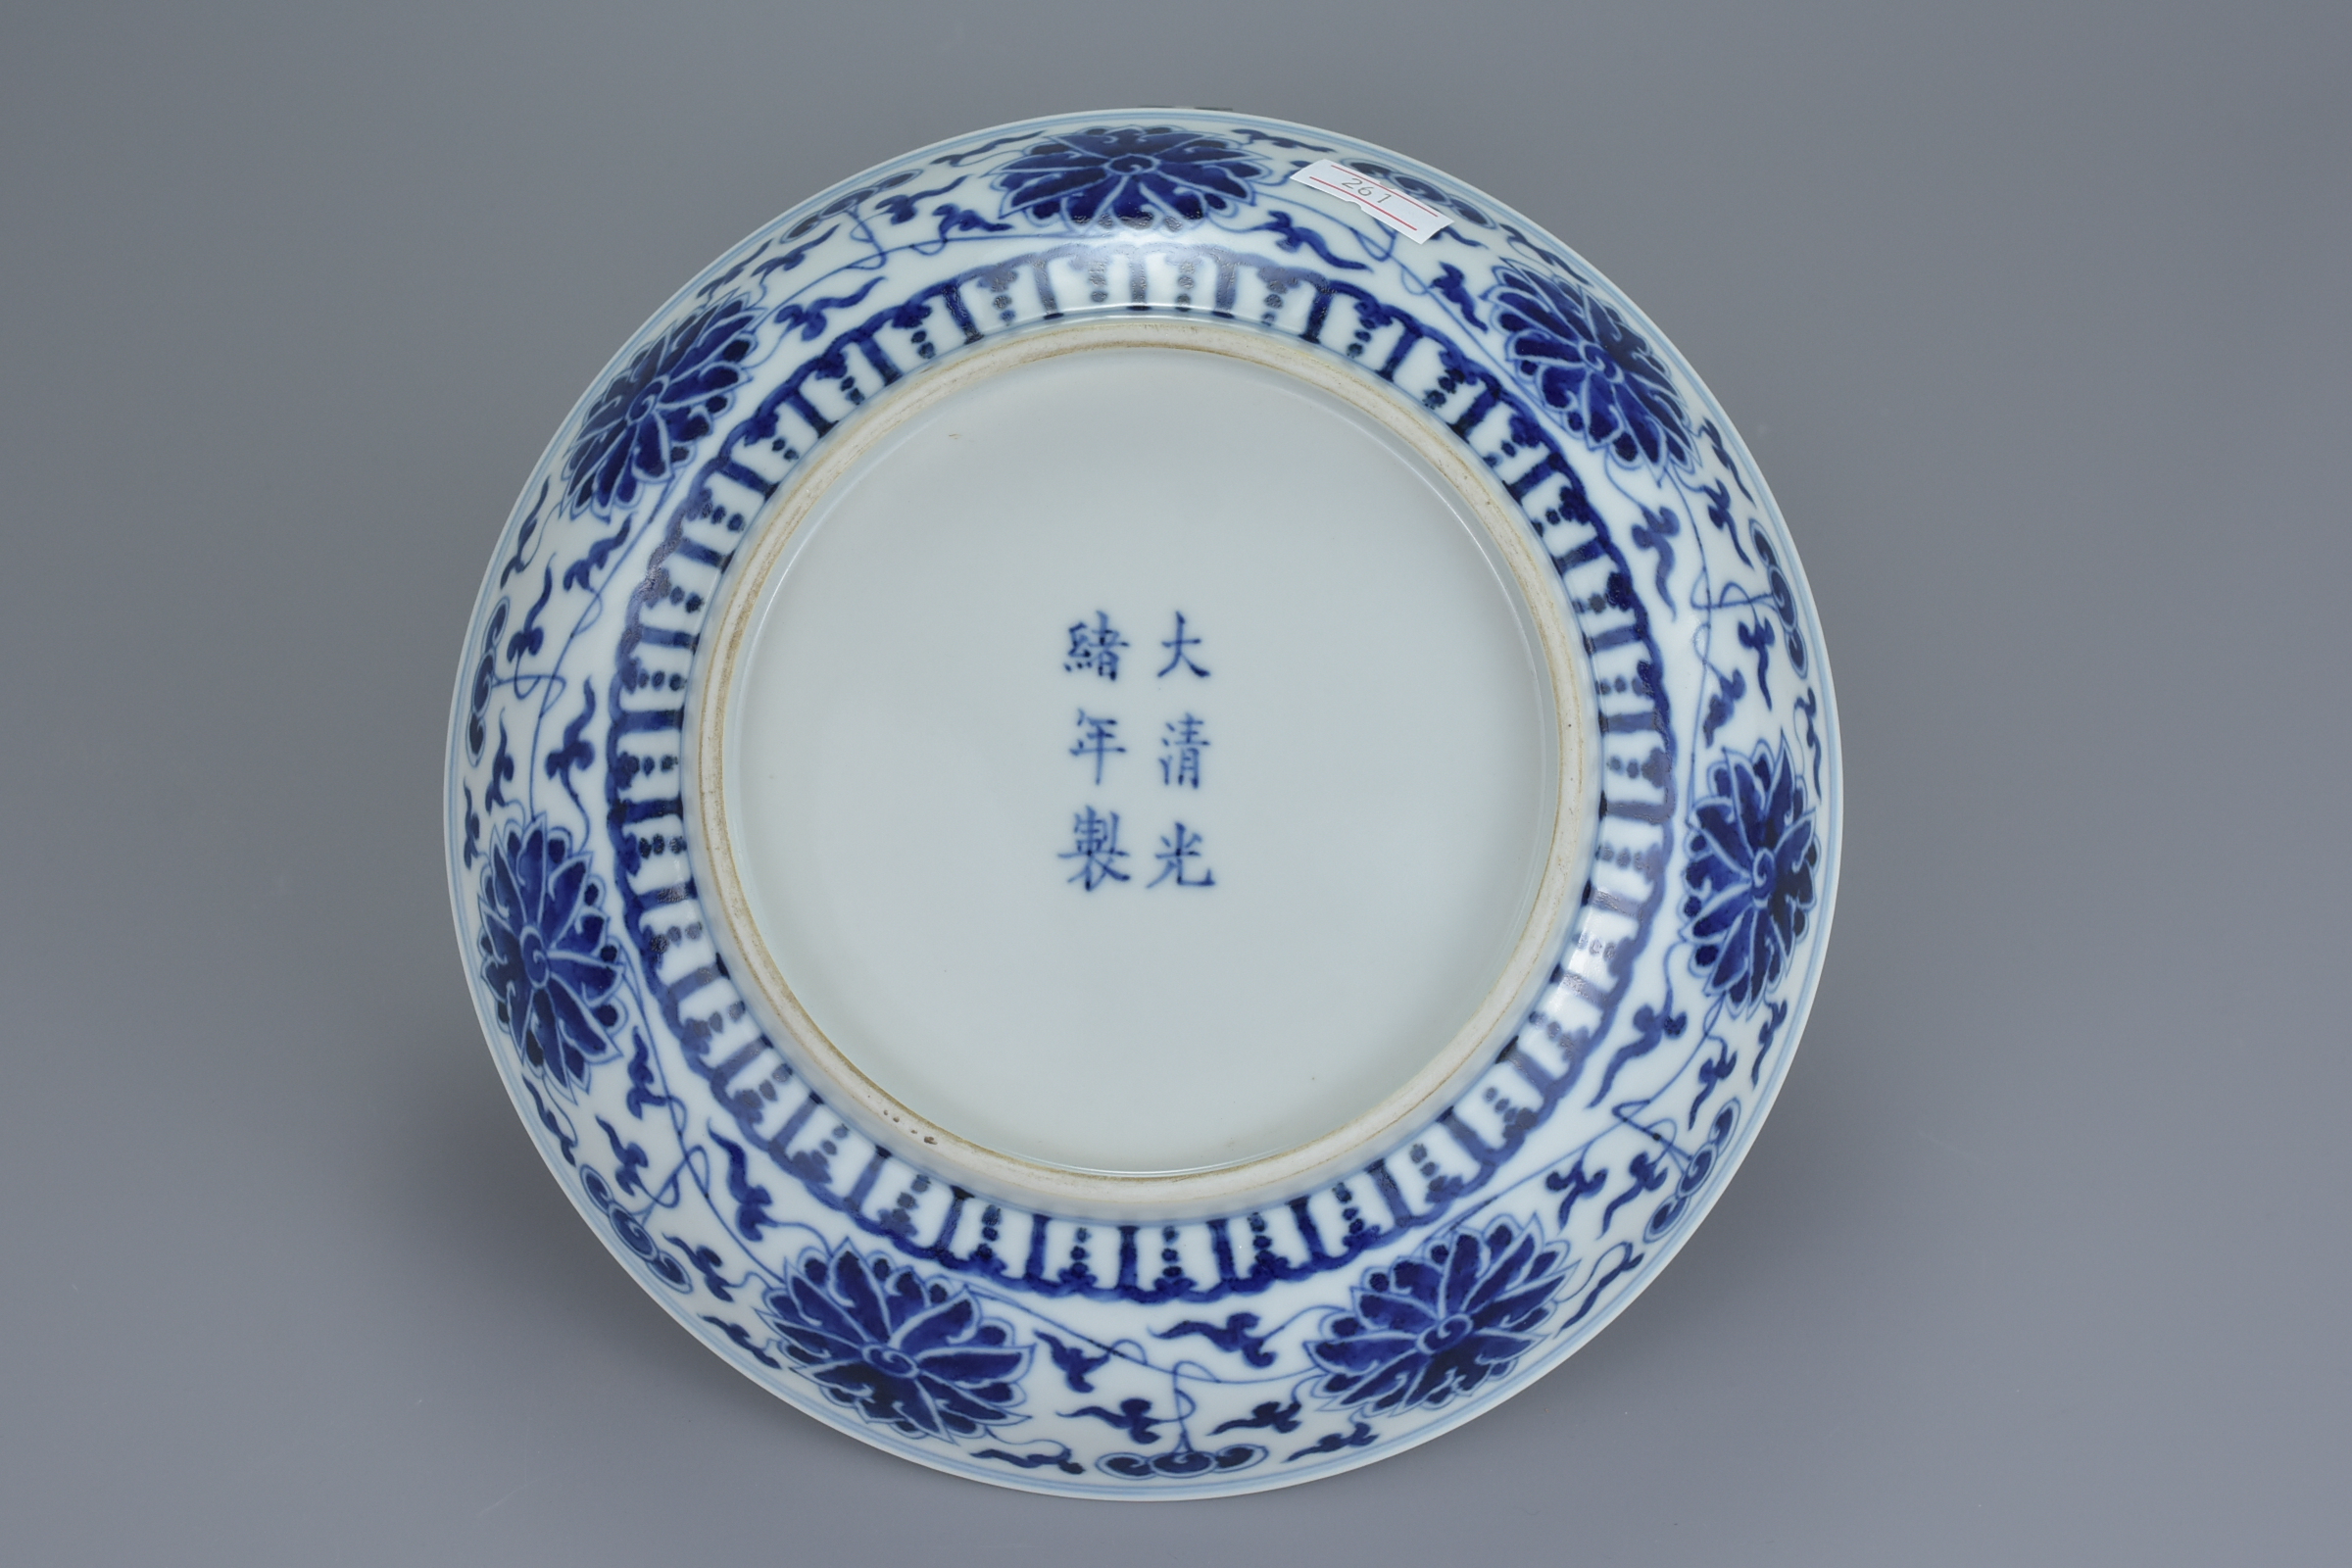 A Chinese late 19th century blue and white porcelain dish with floral lotus, chrysanthemum and peony - Image 4 of 6